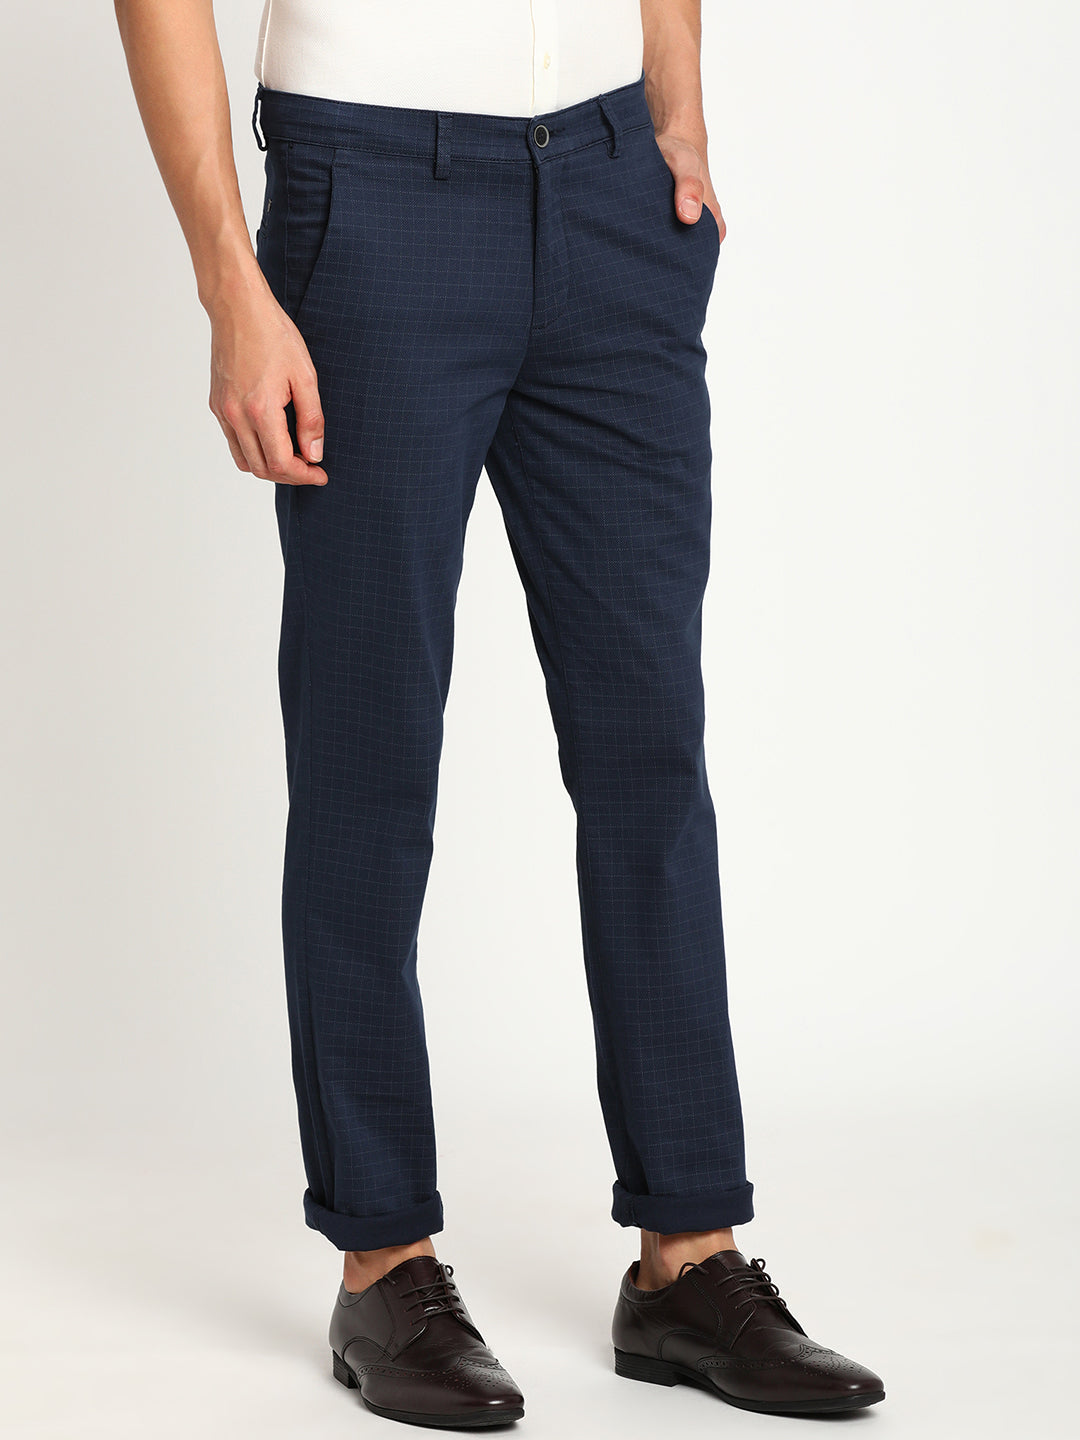 Cotton Stretch Navy Blue Checked Ultra Slim Fit Trouser